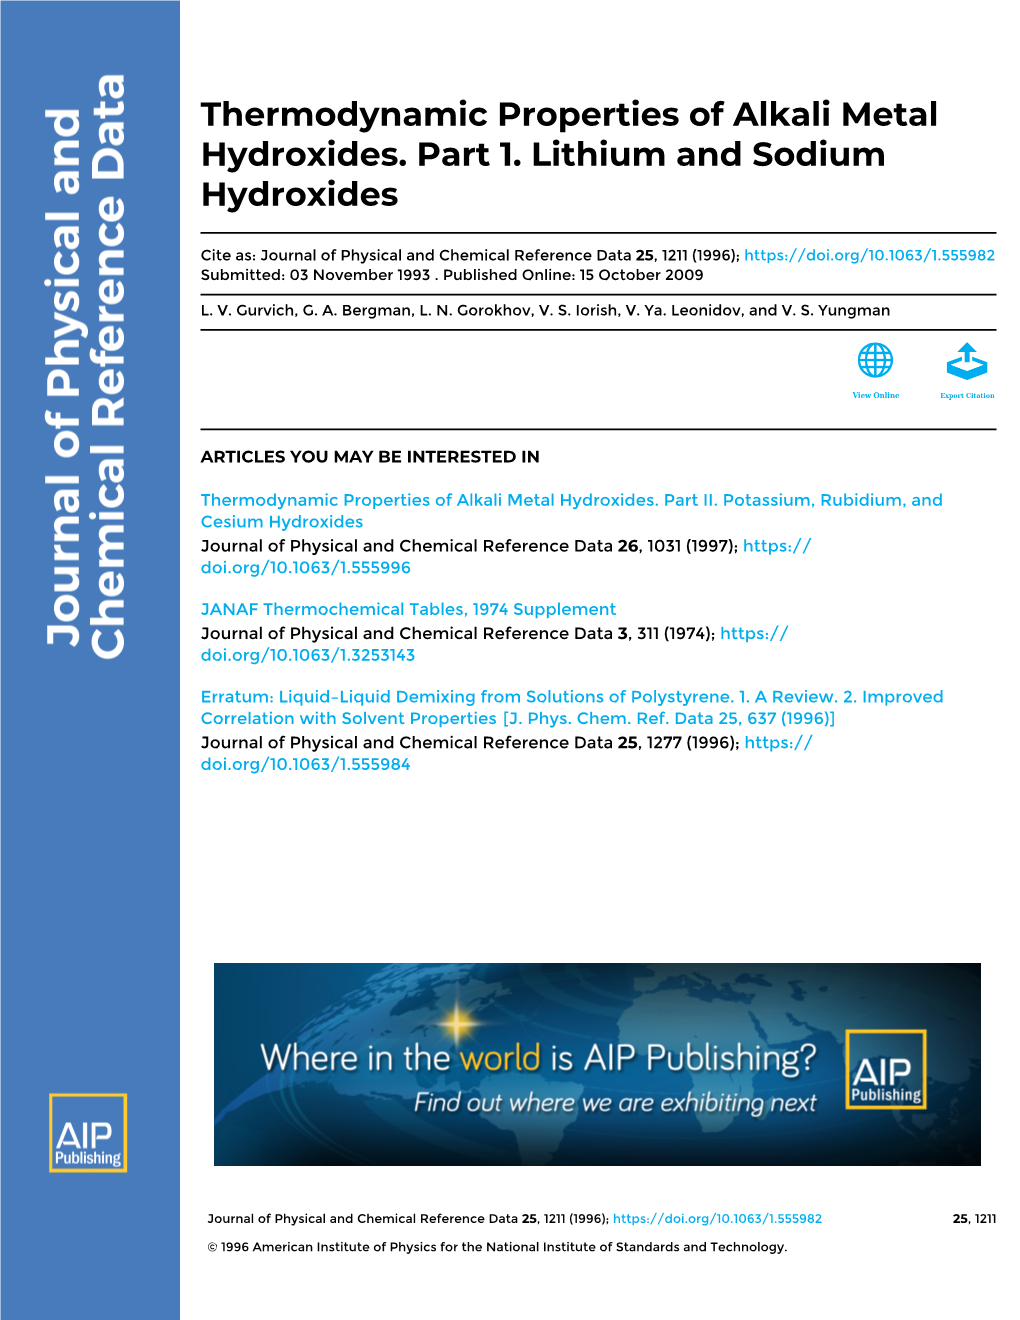 Thermodynamic Properties of Alkali Metal Hydroxides. Part 1. Lithium and Sodium Hydroxides